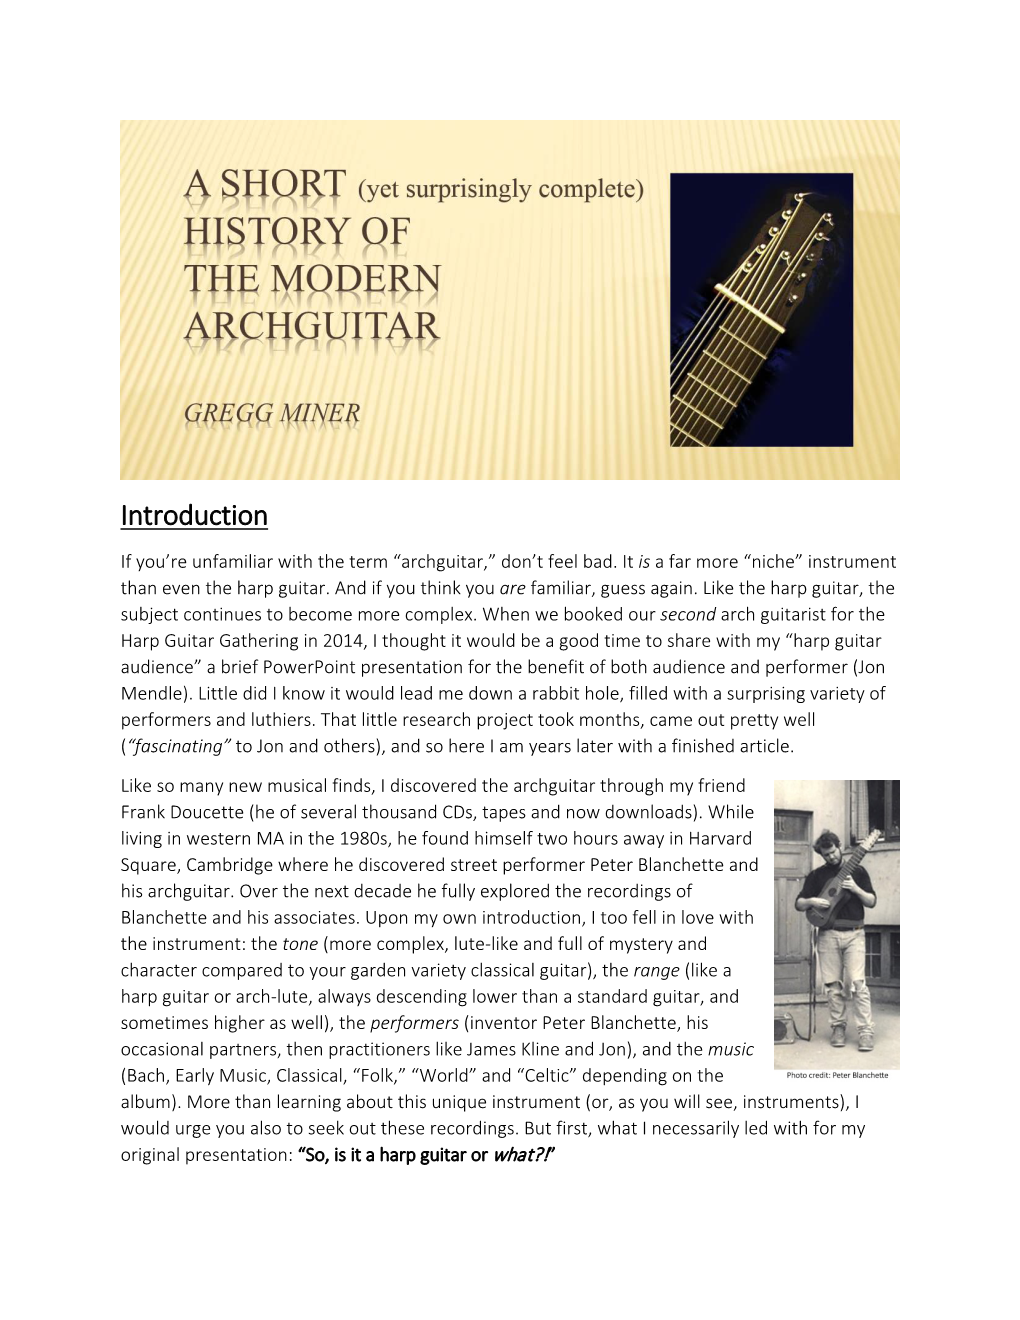 A Short History of the Modern Archguitar